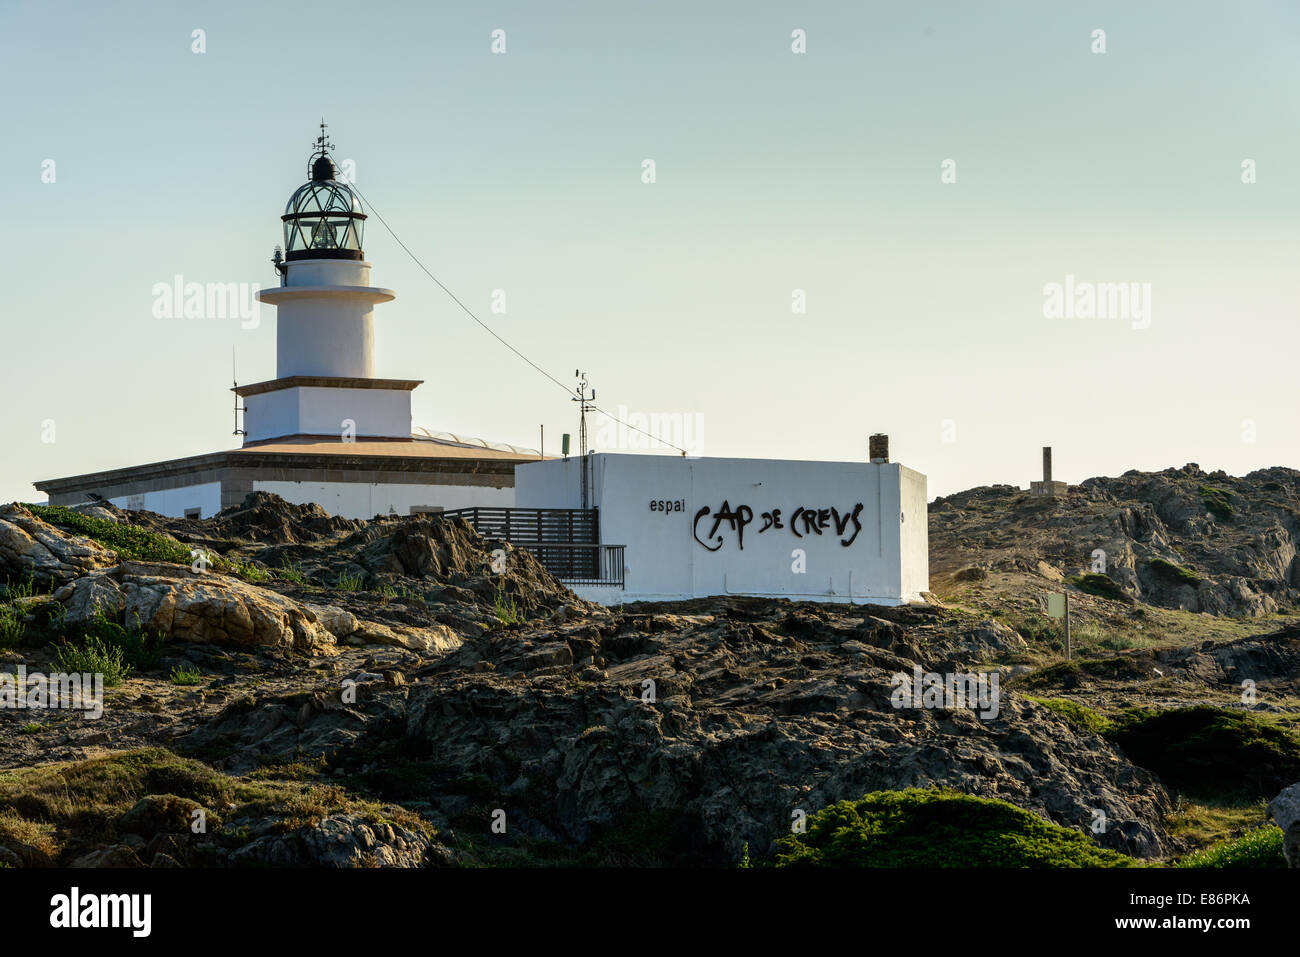 Photograph of the Lighthouse in the Cap de Creus natural park and reserve, located in the Catalan Costa Brava. Stock Photo